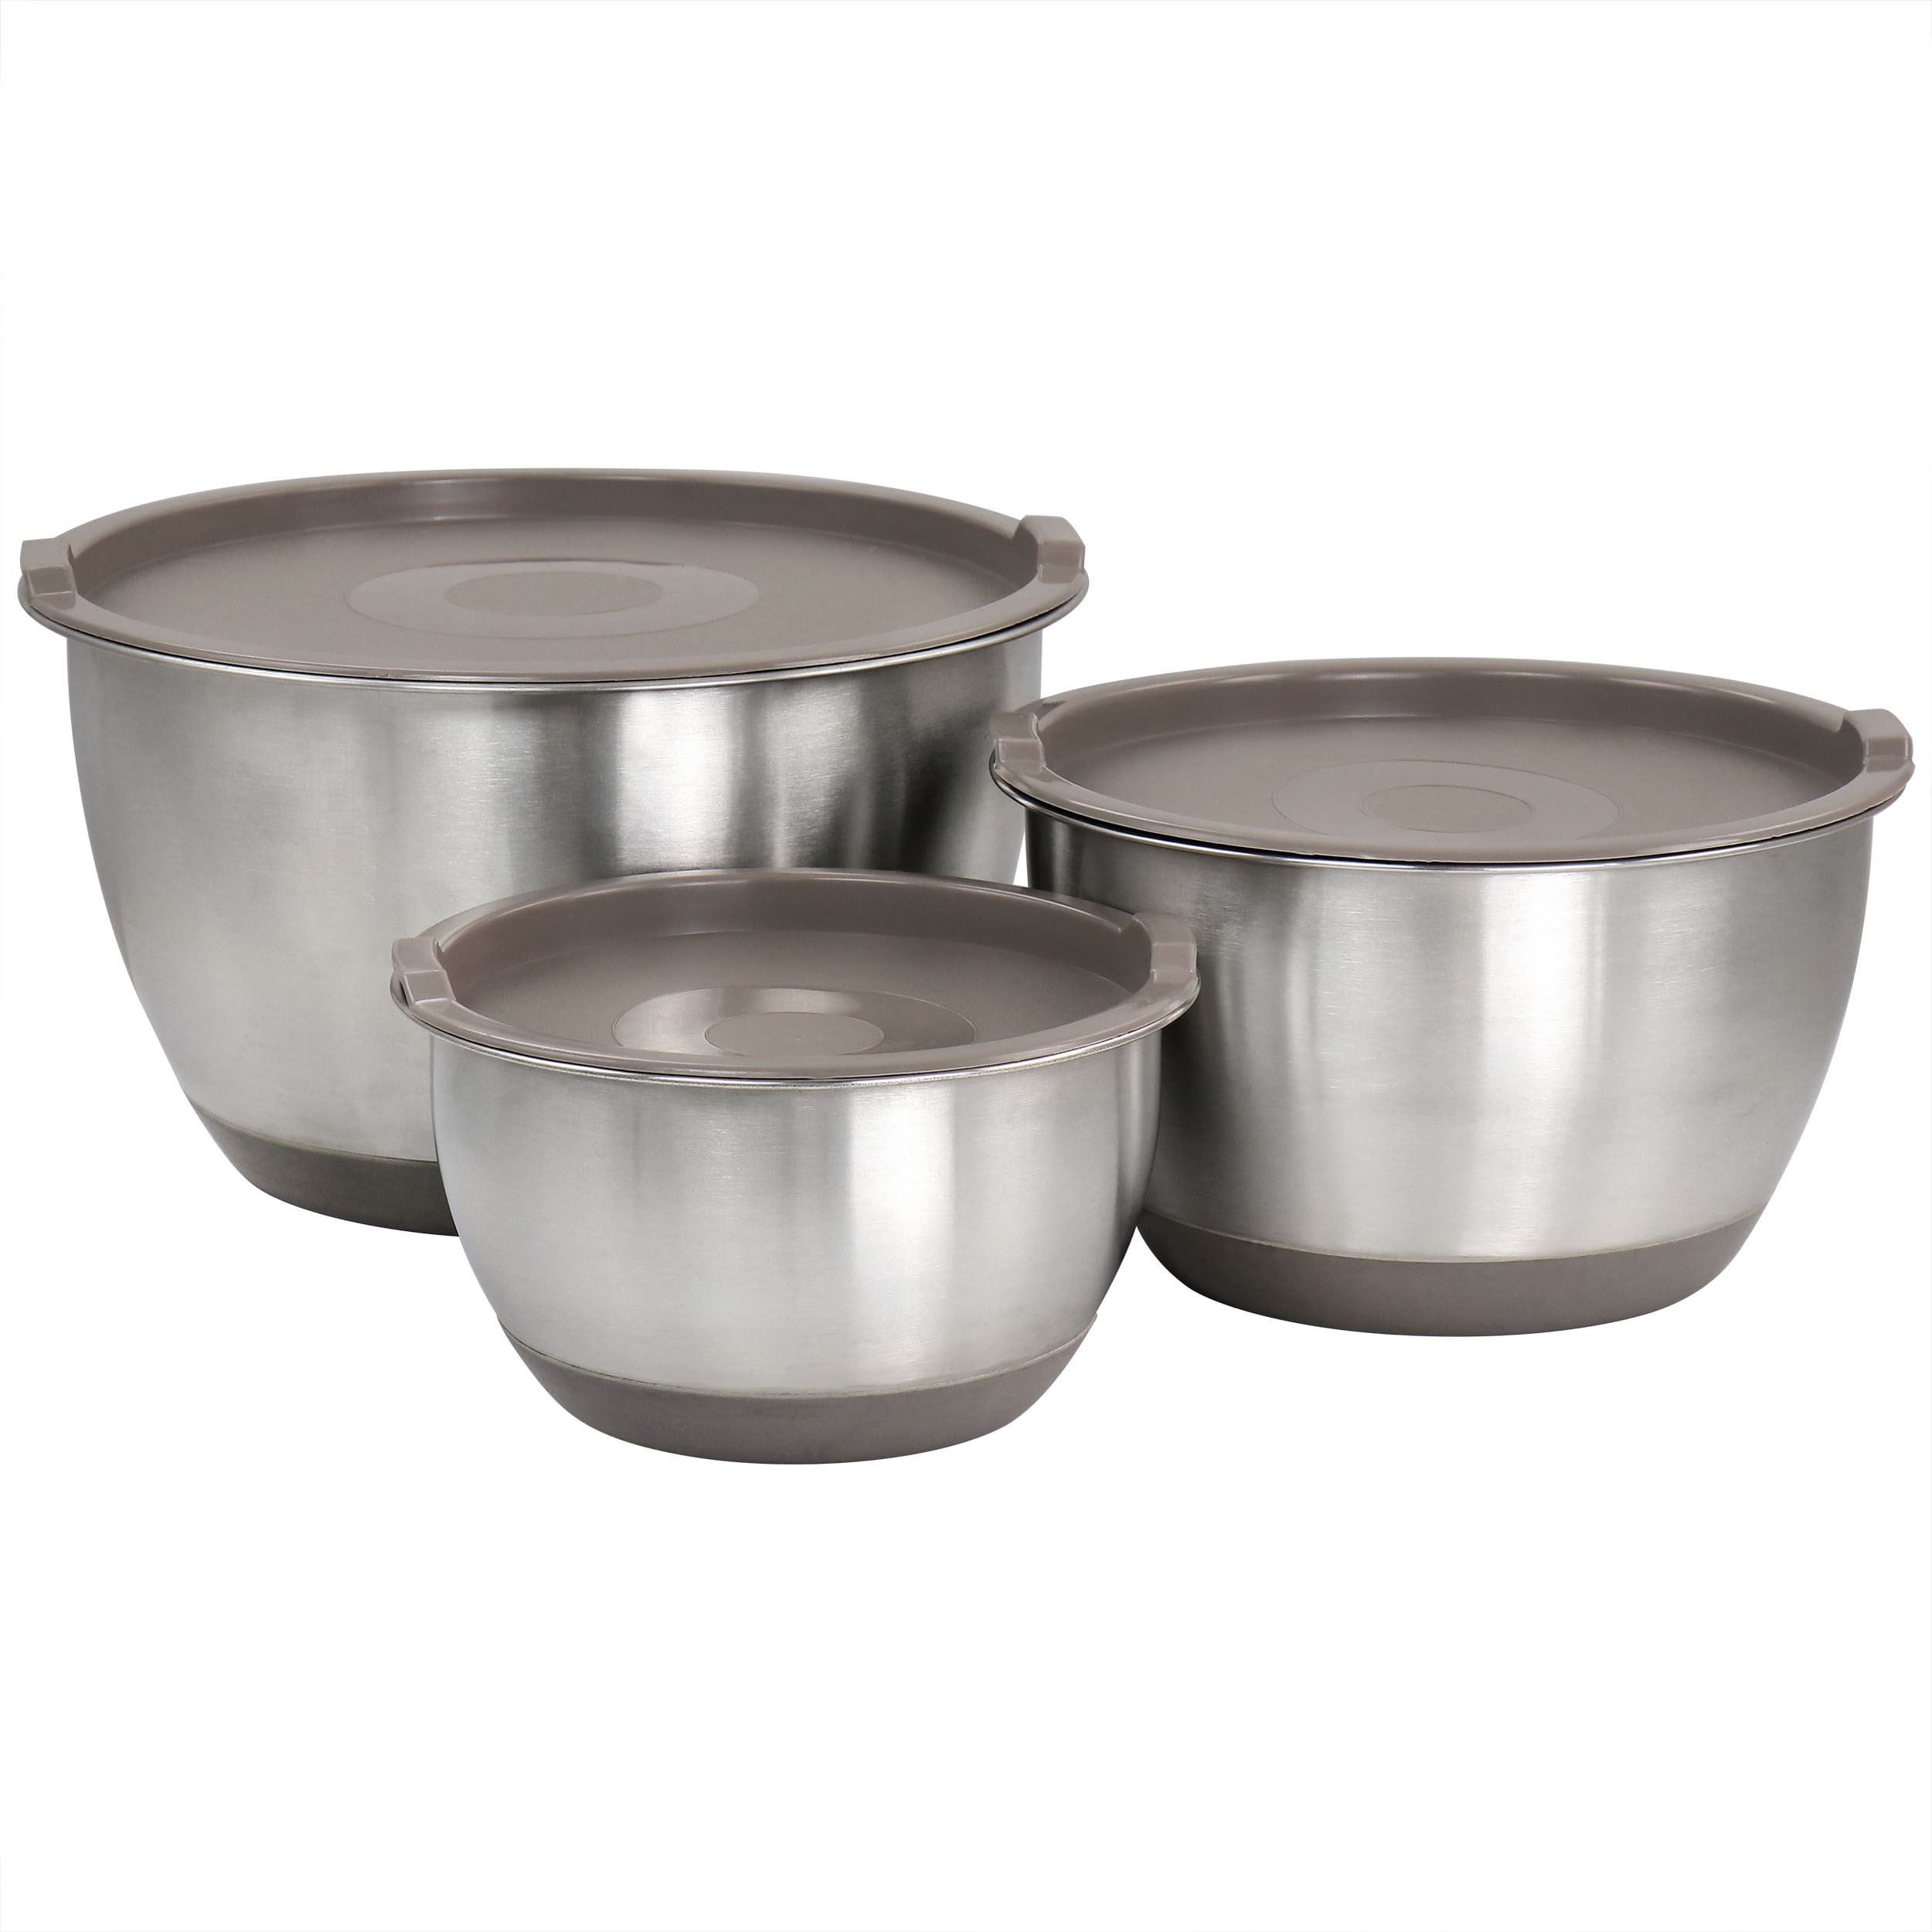 https://ak1.ostkcdn.com/images/products/is/images/direct/f9f5152bc7b55fdc6f53a7f669d07d8f32fe909a/Martha-Stewart-3-Piece-Stainless-Steel-Mixing-Bowl-and-Lid-Set.jpg